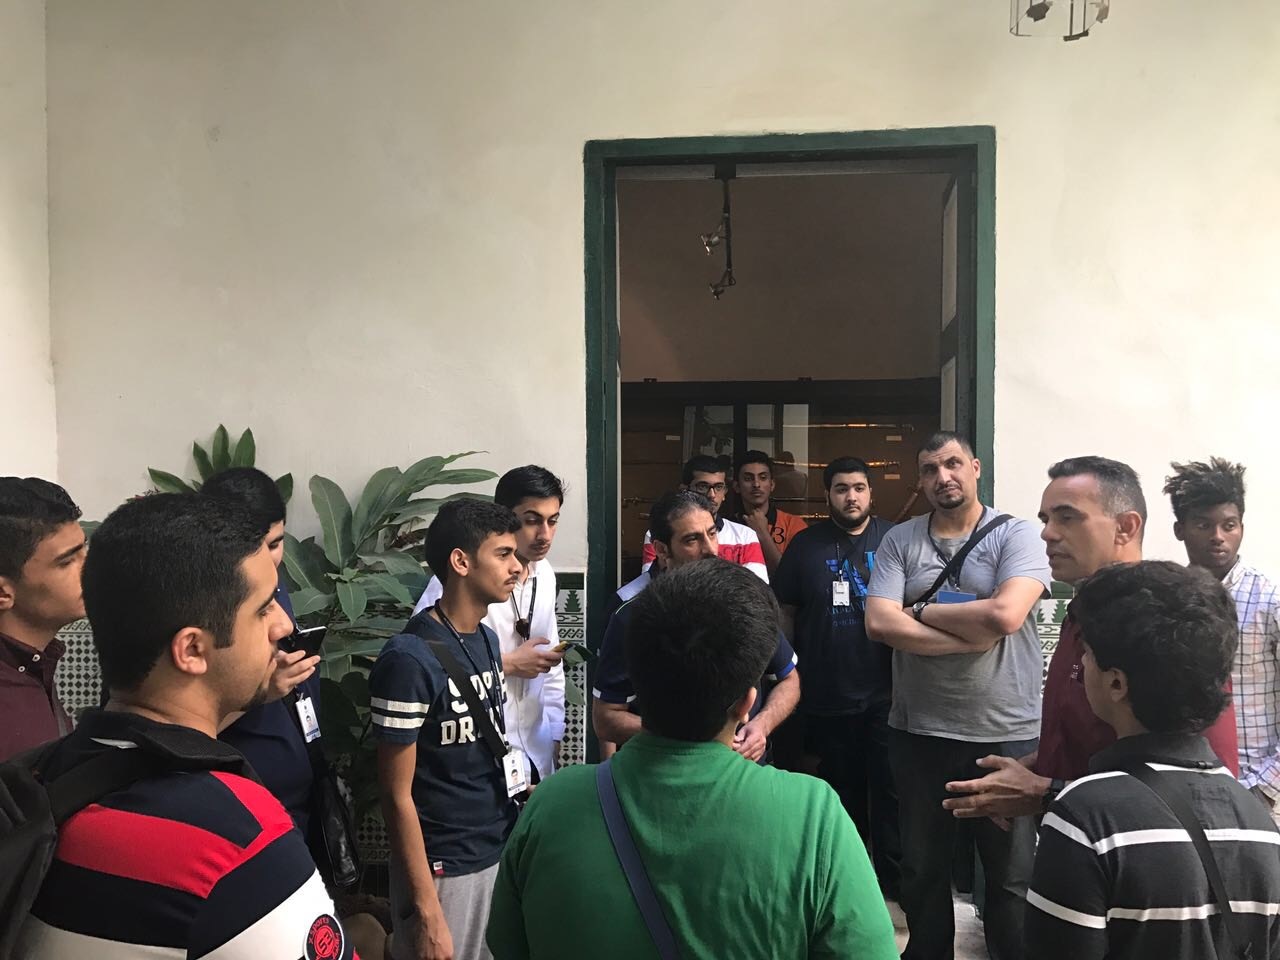 The Kuwaiti students during their visit to Cuba